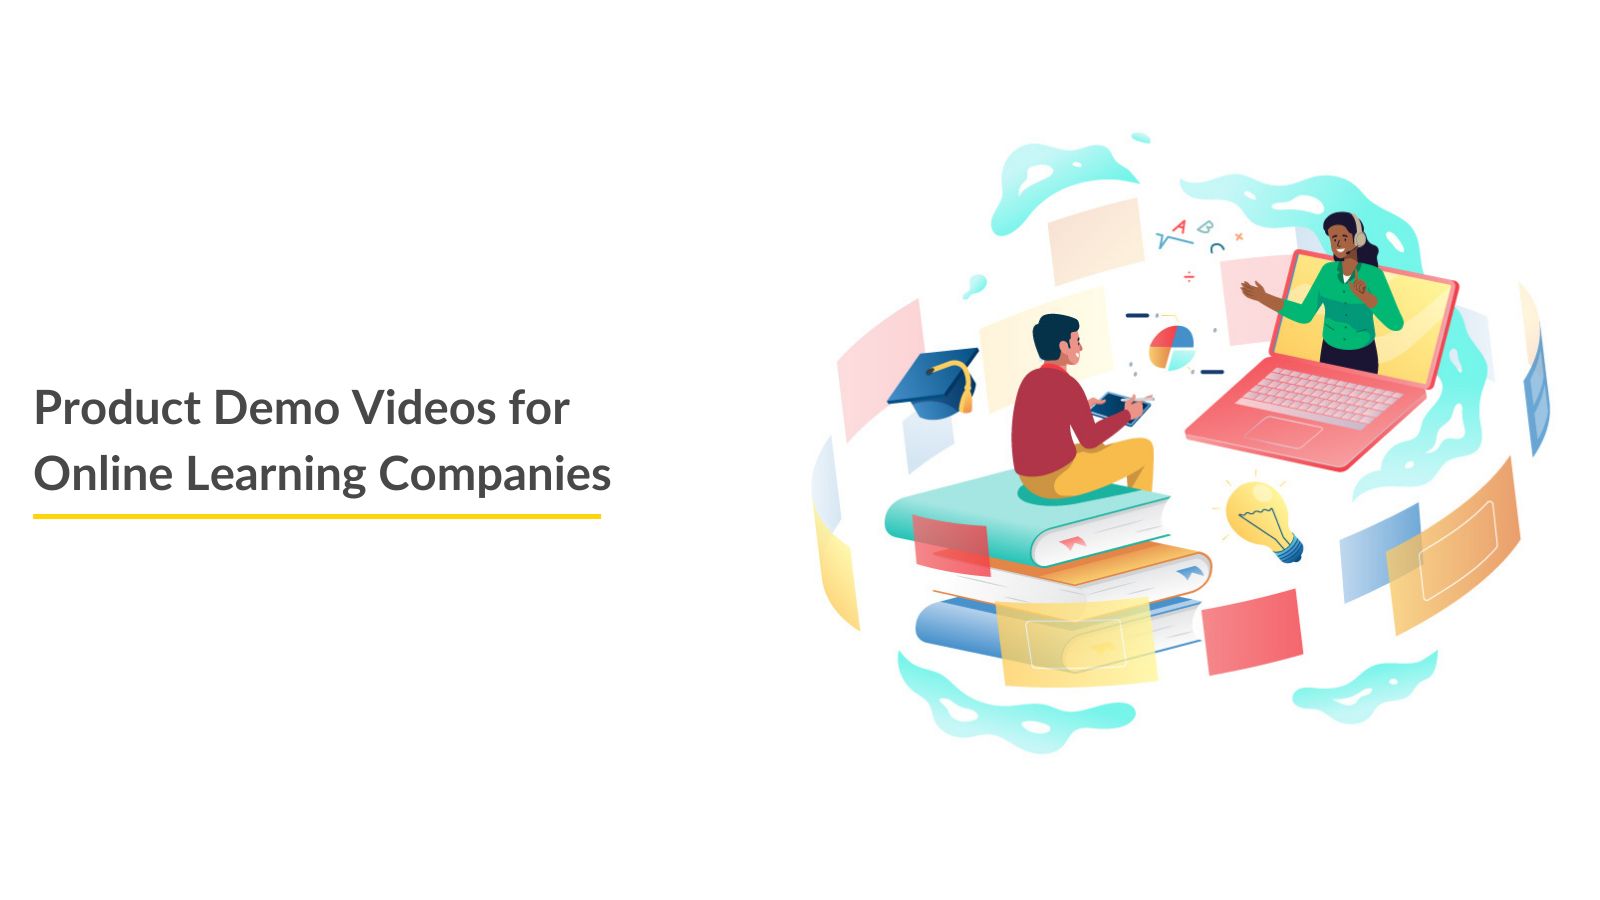 Product Demo Videos for Online Learning Companies